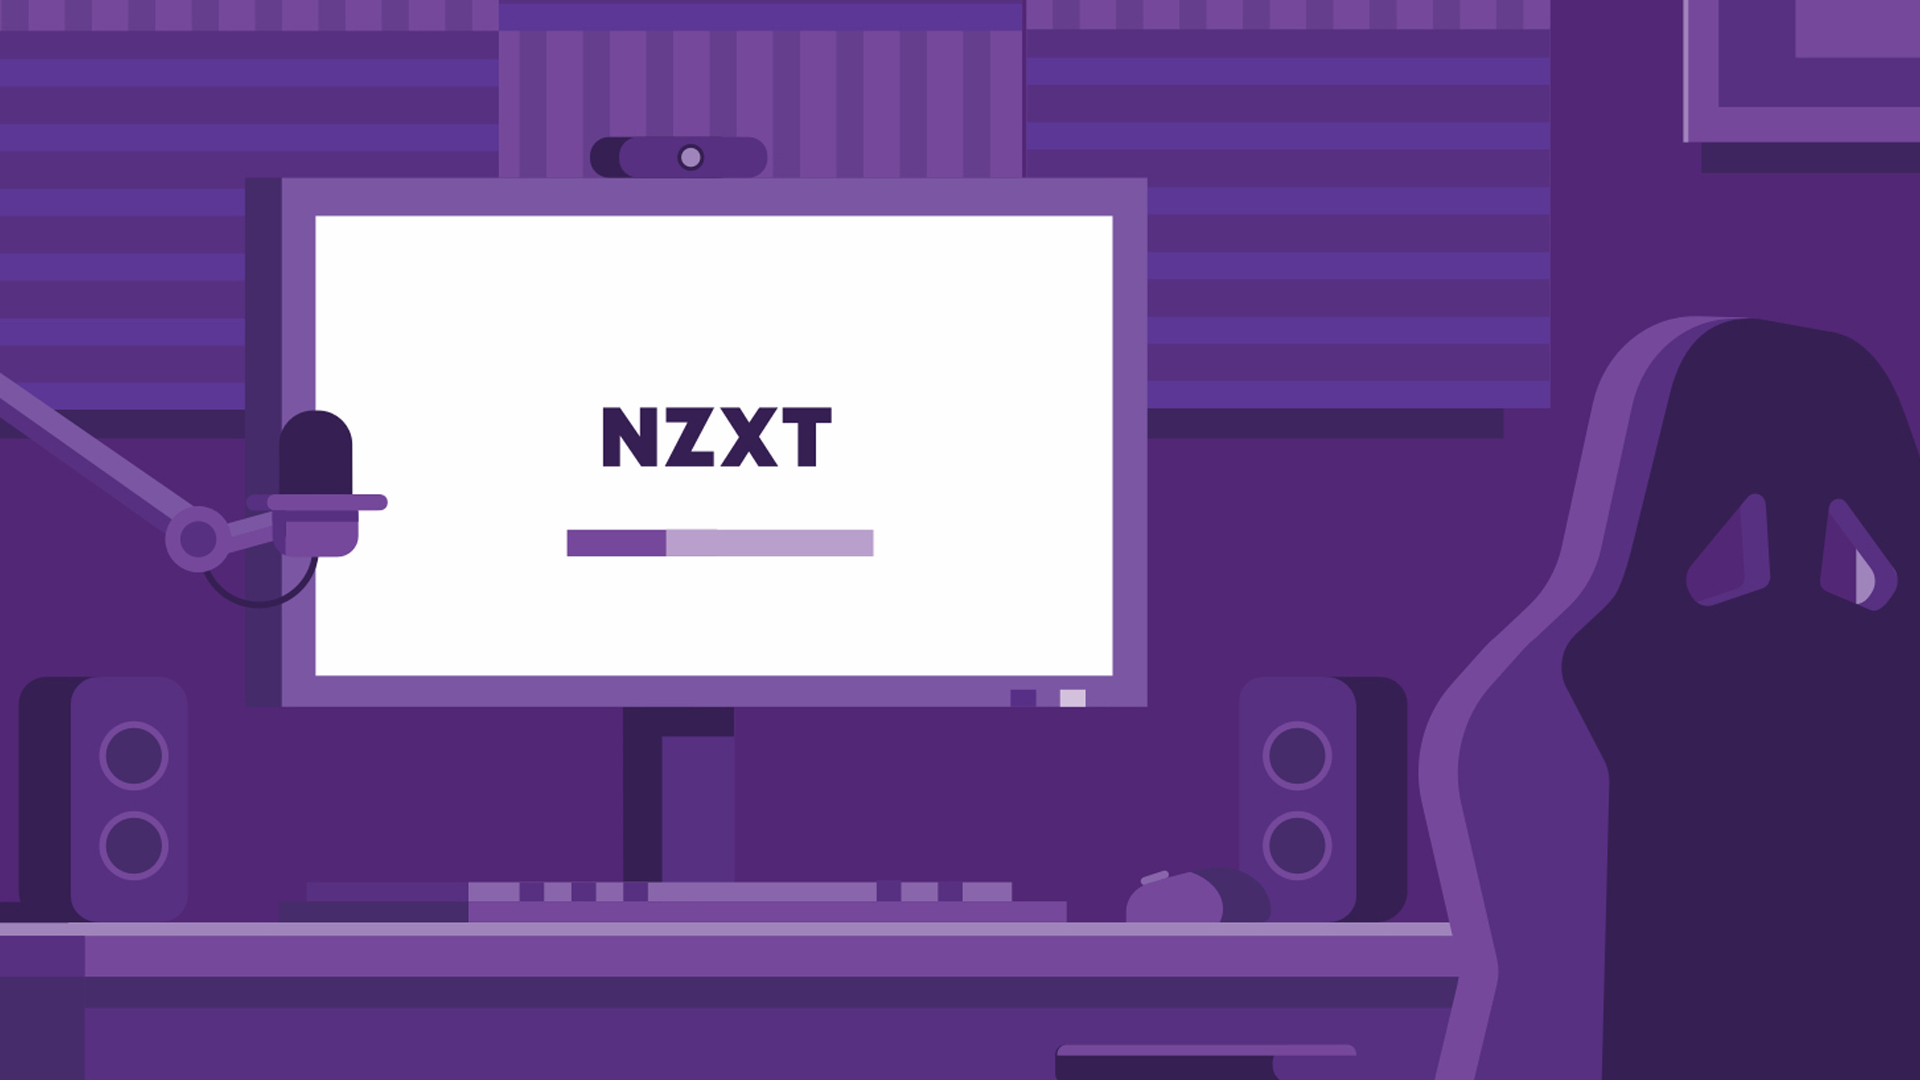 NZXT Pucci PC Gaming 1920x1080